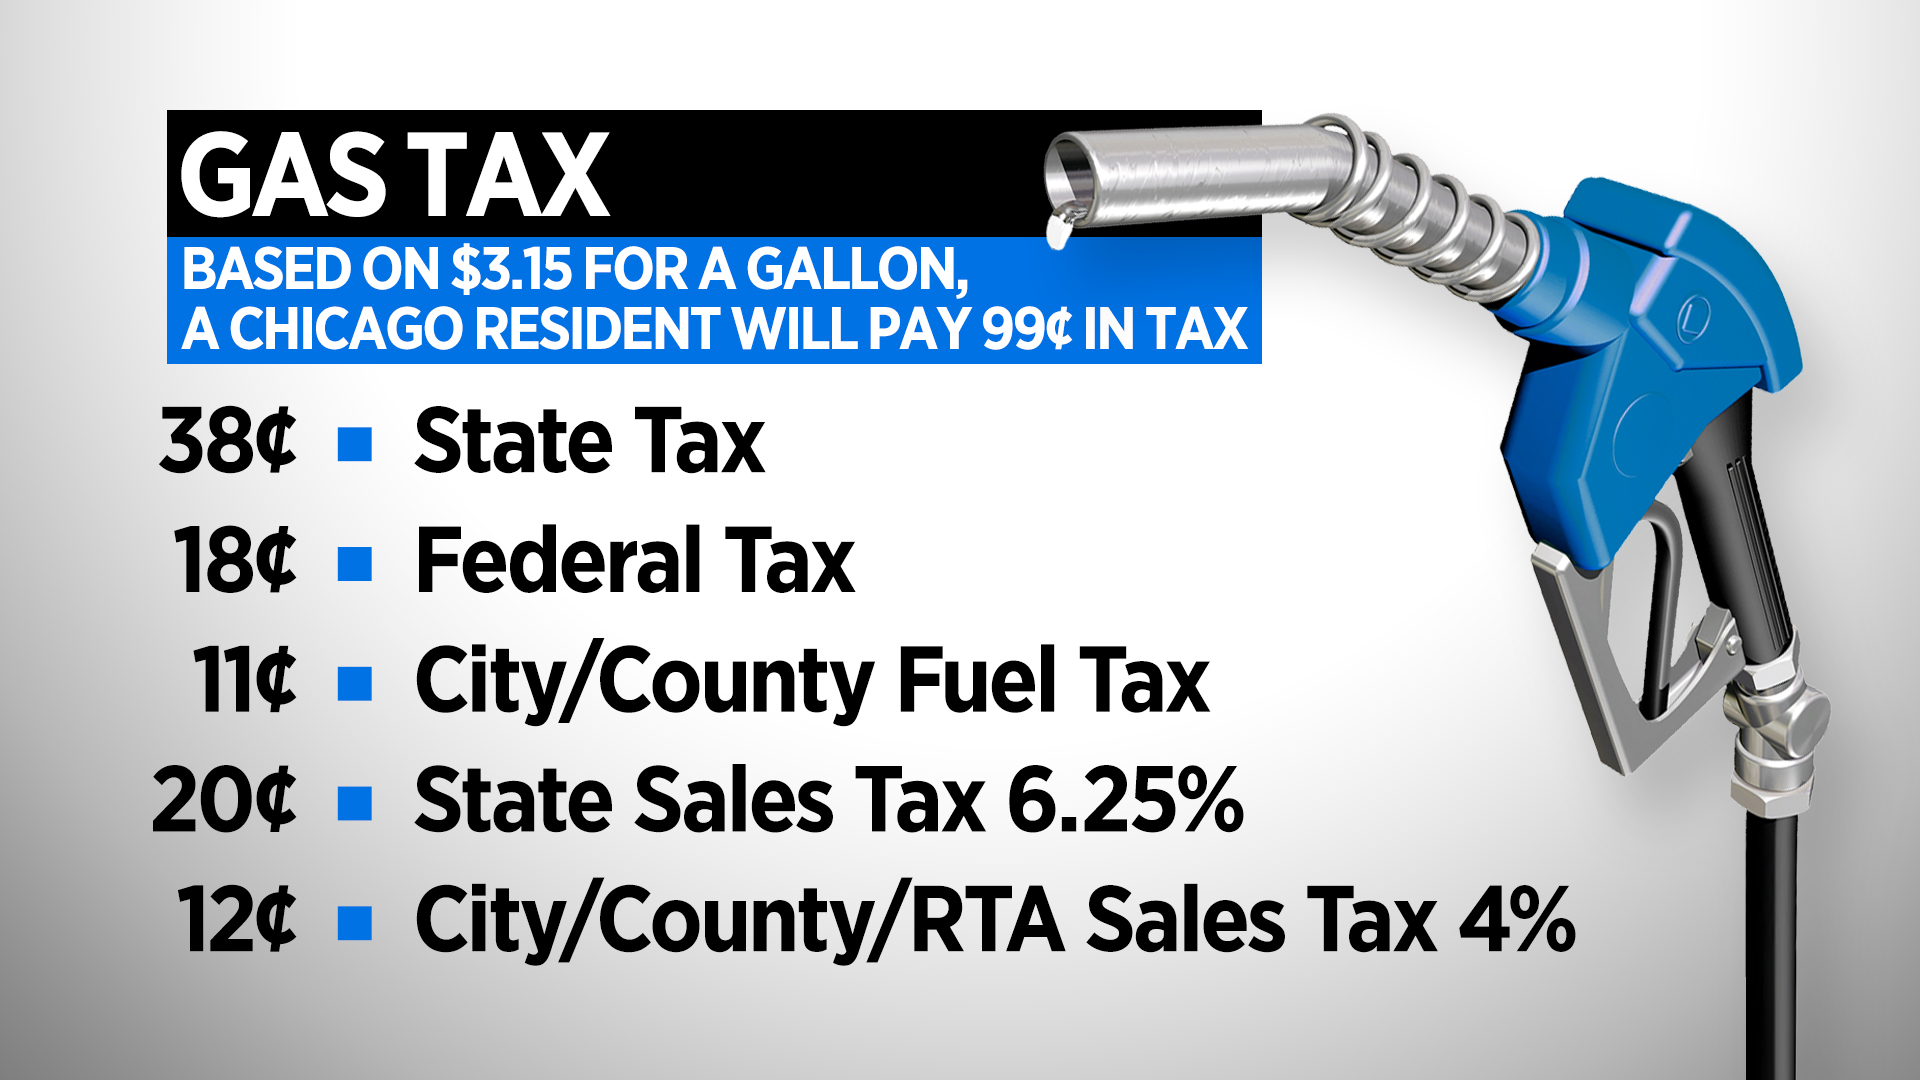 July Brings Higher Gas Taxes, Cigarette Taxes, And More To Fund Road